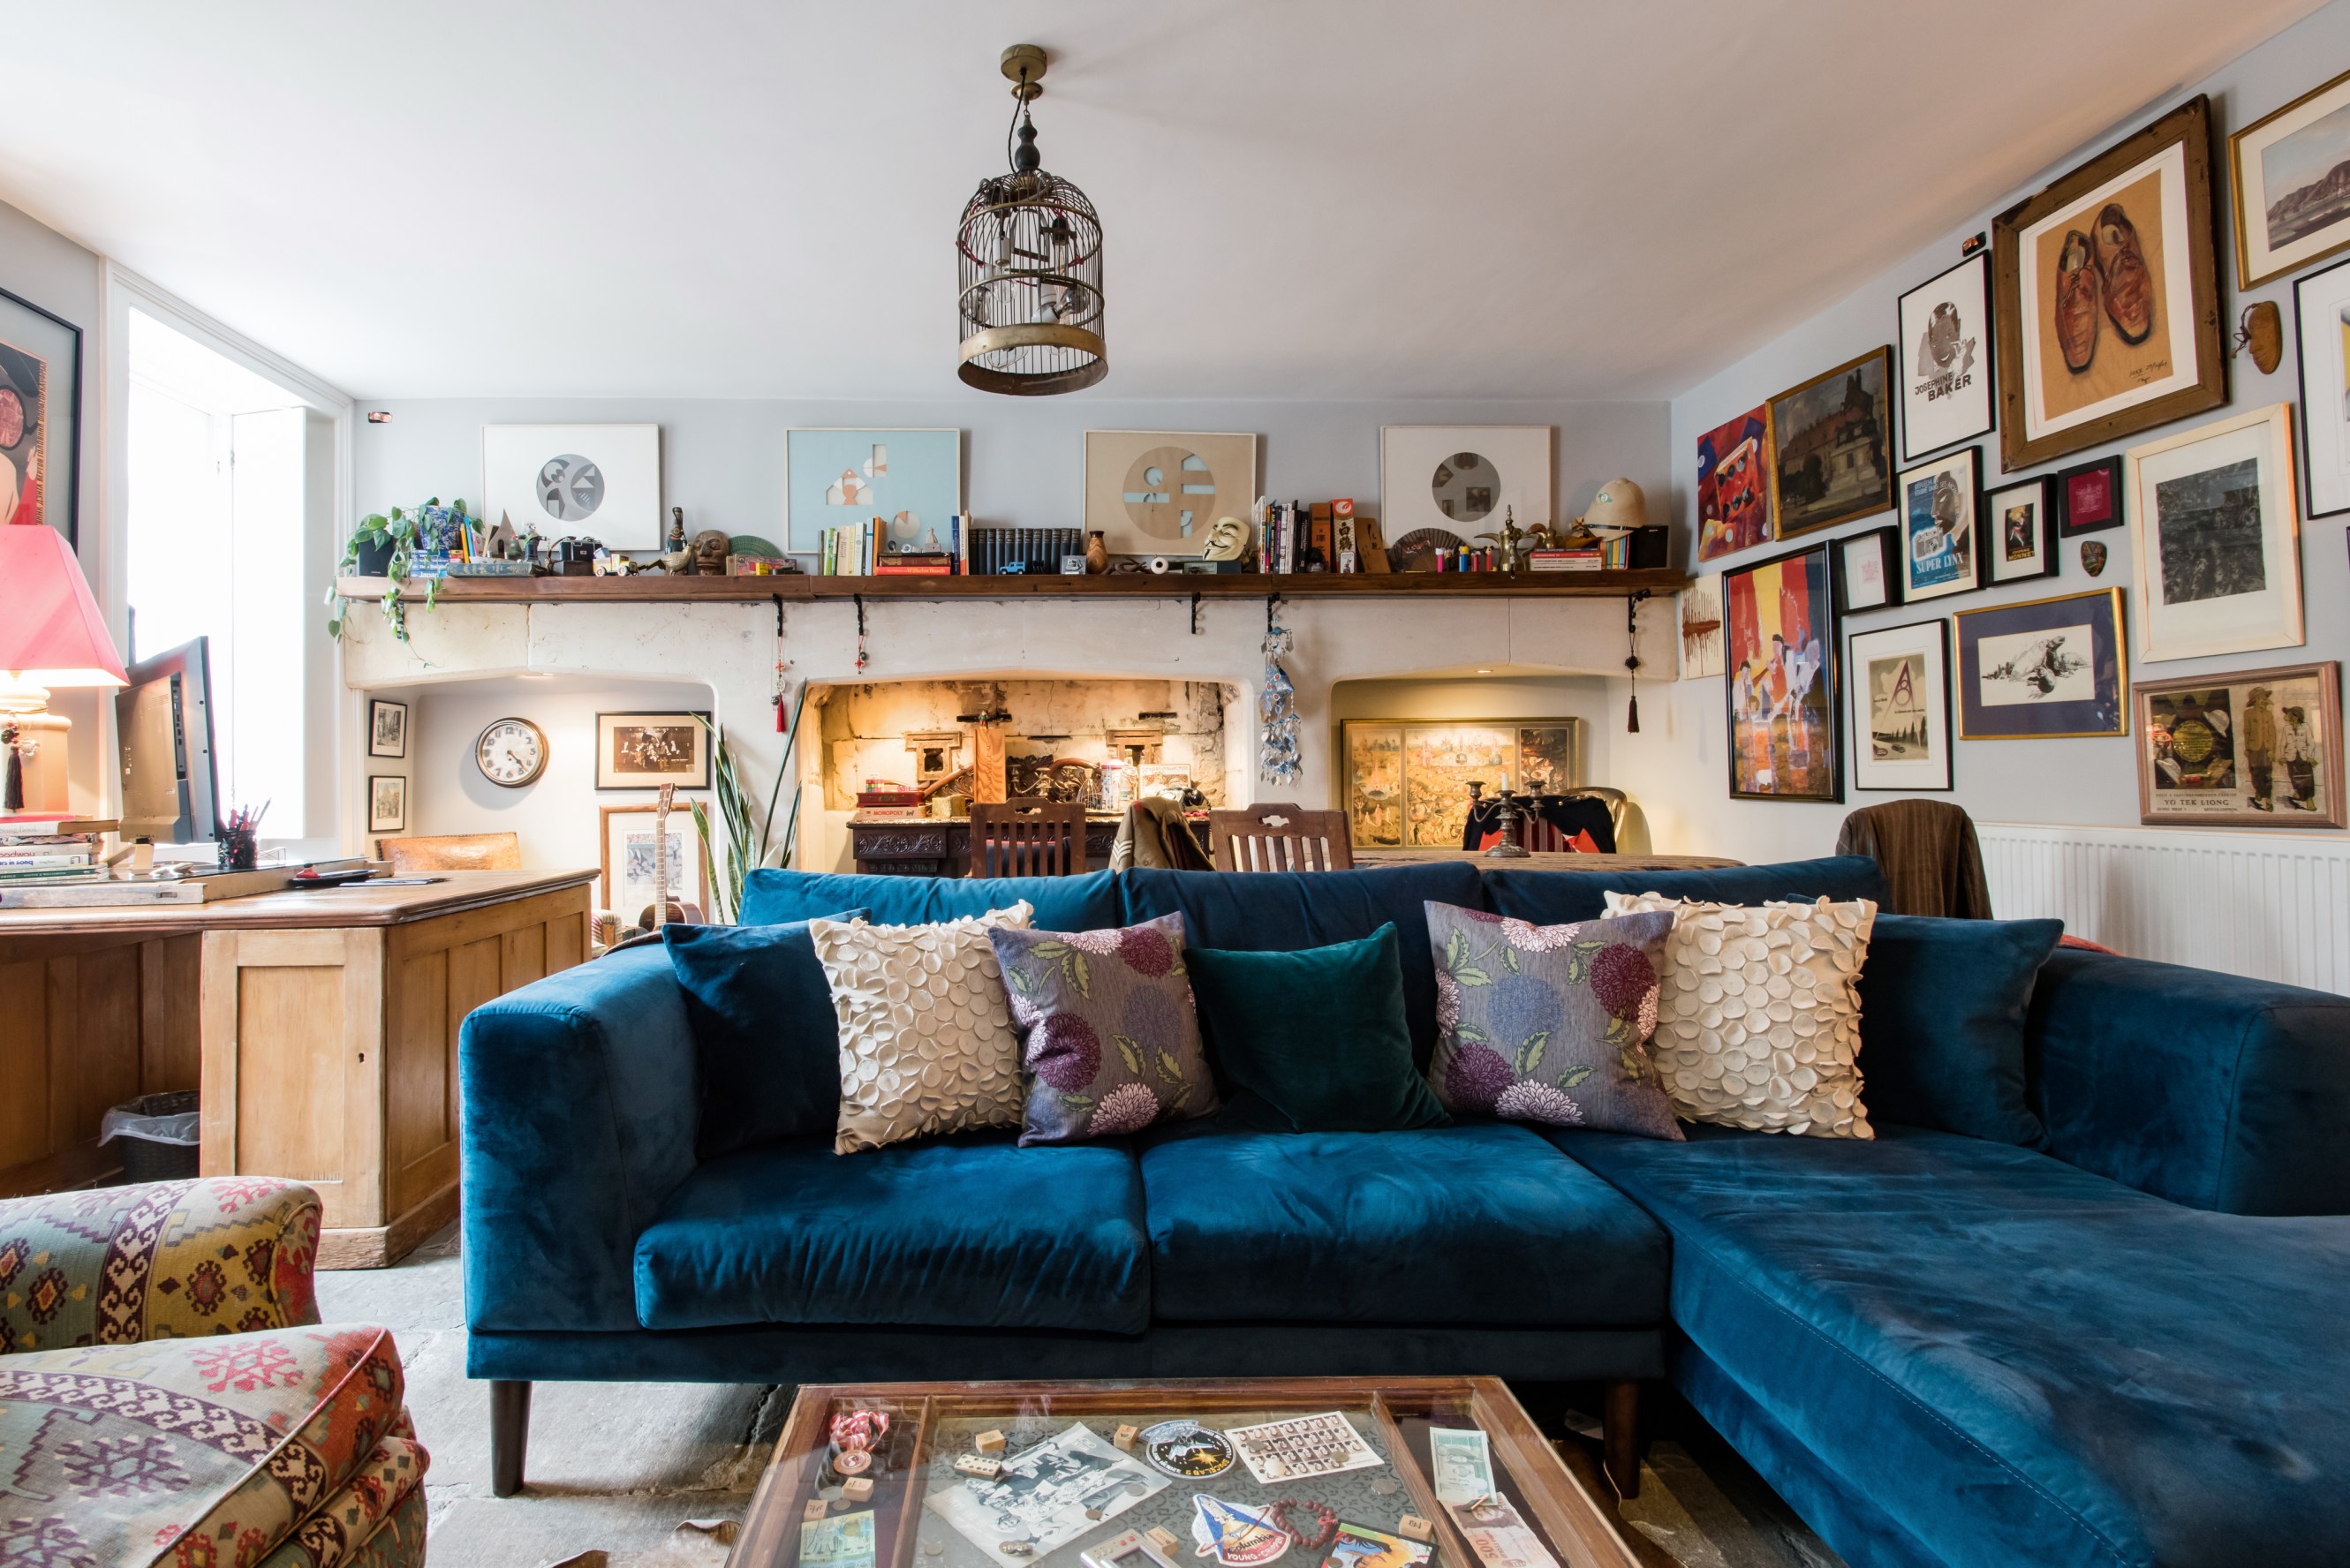 The living room of Maxwell's listing, with a large blue sofa and walls eclectically covered with framed images and artwork.